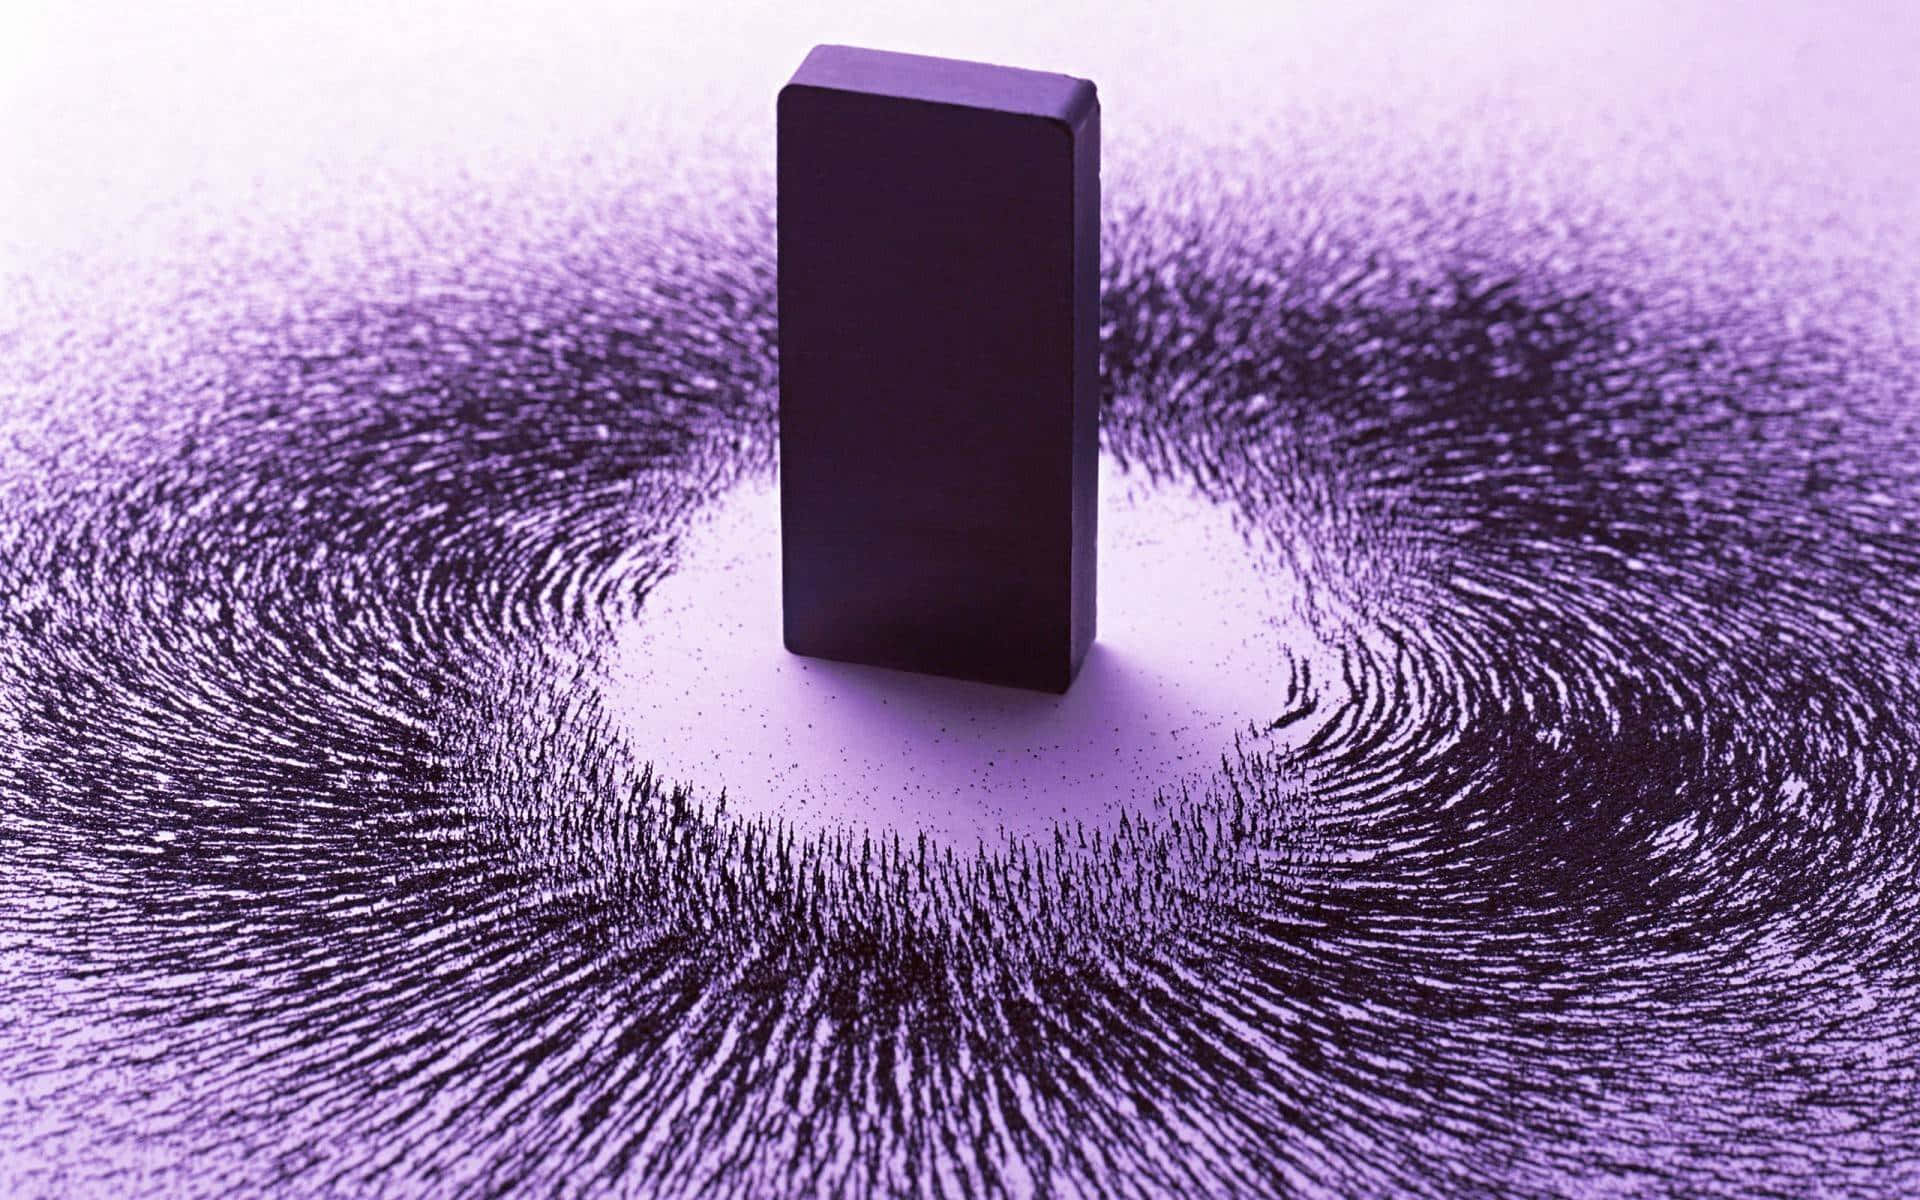 A Black Square With A Purple Background